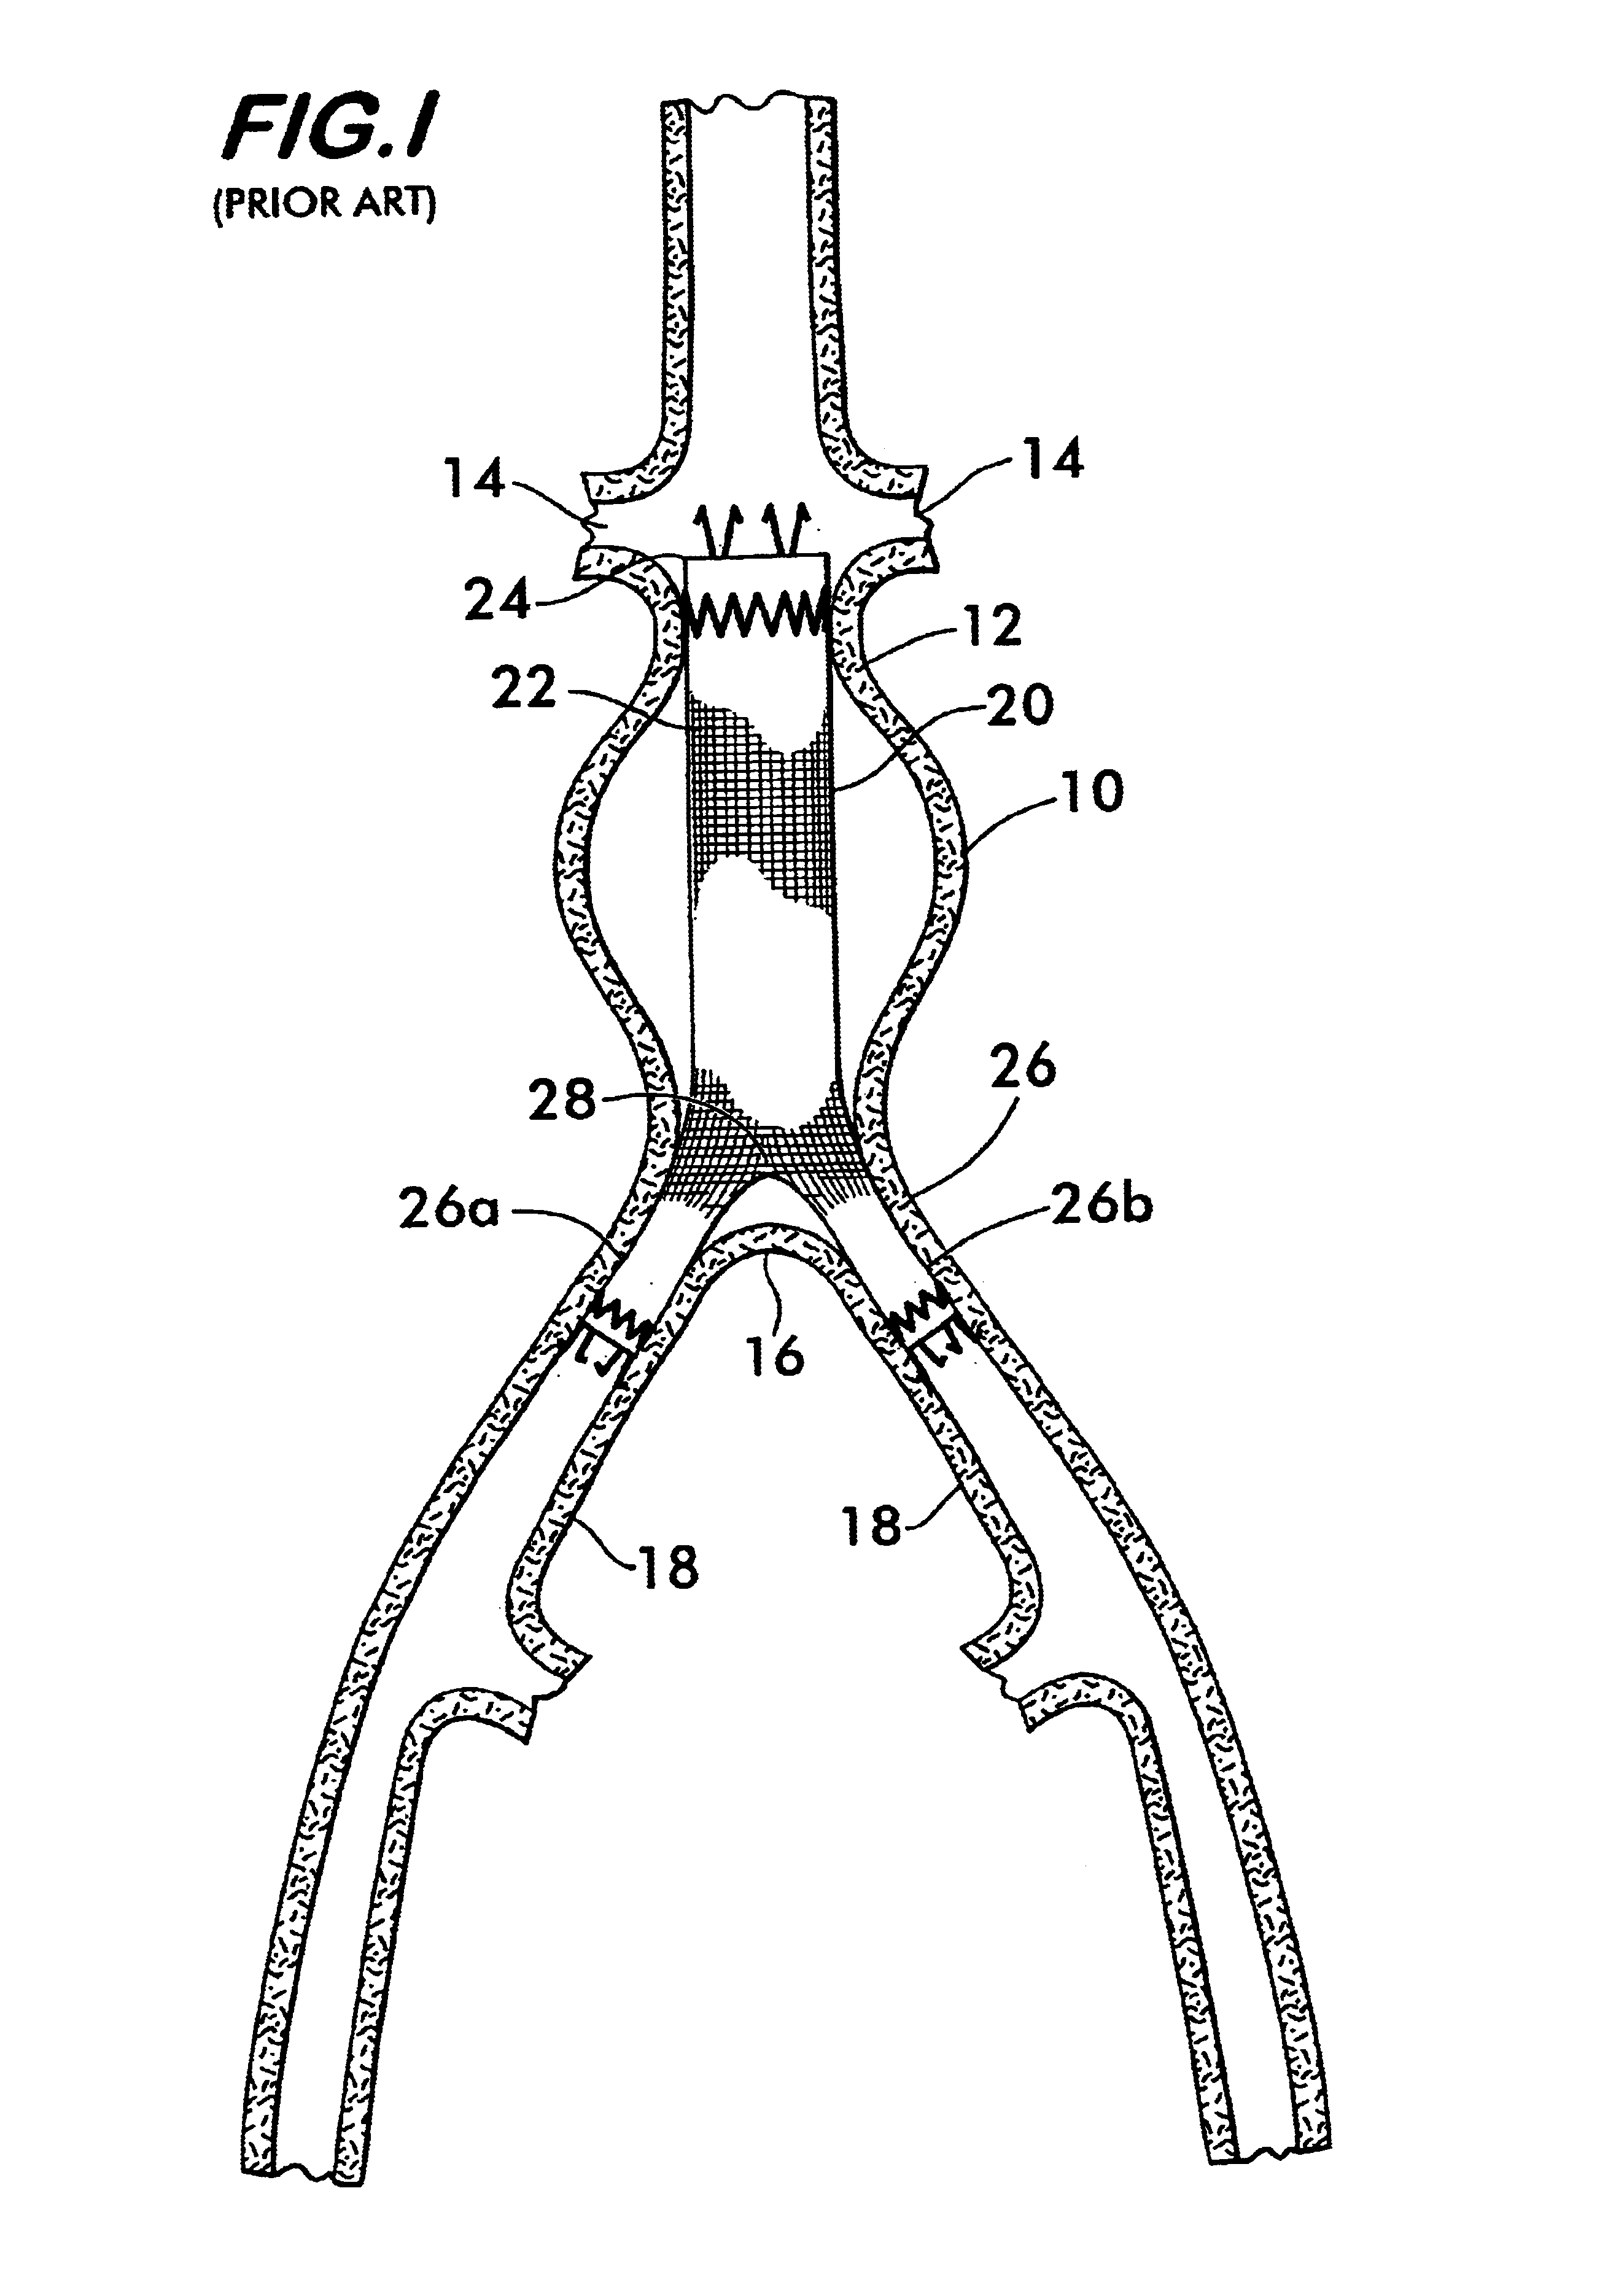 Woven tubular graft with regions of varying flexibility